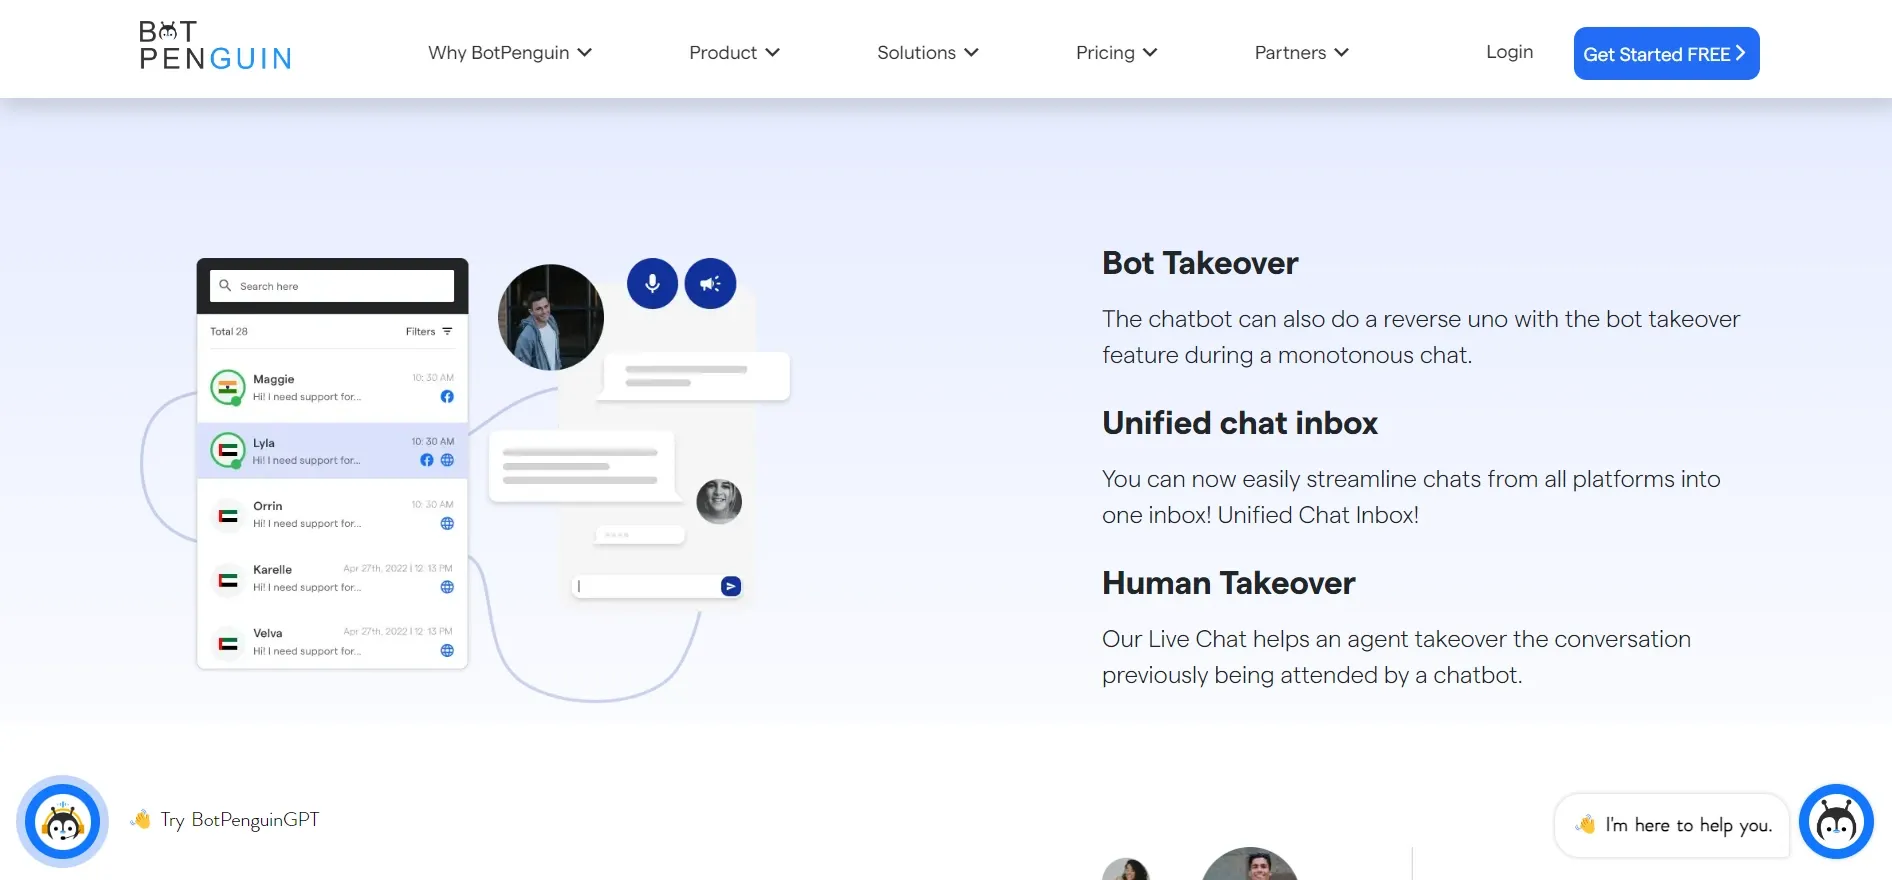 How to Design an Engaging Live Chat Experience